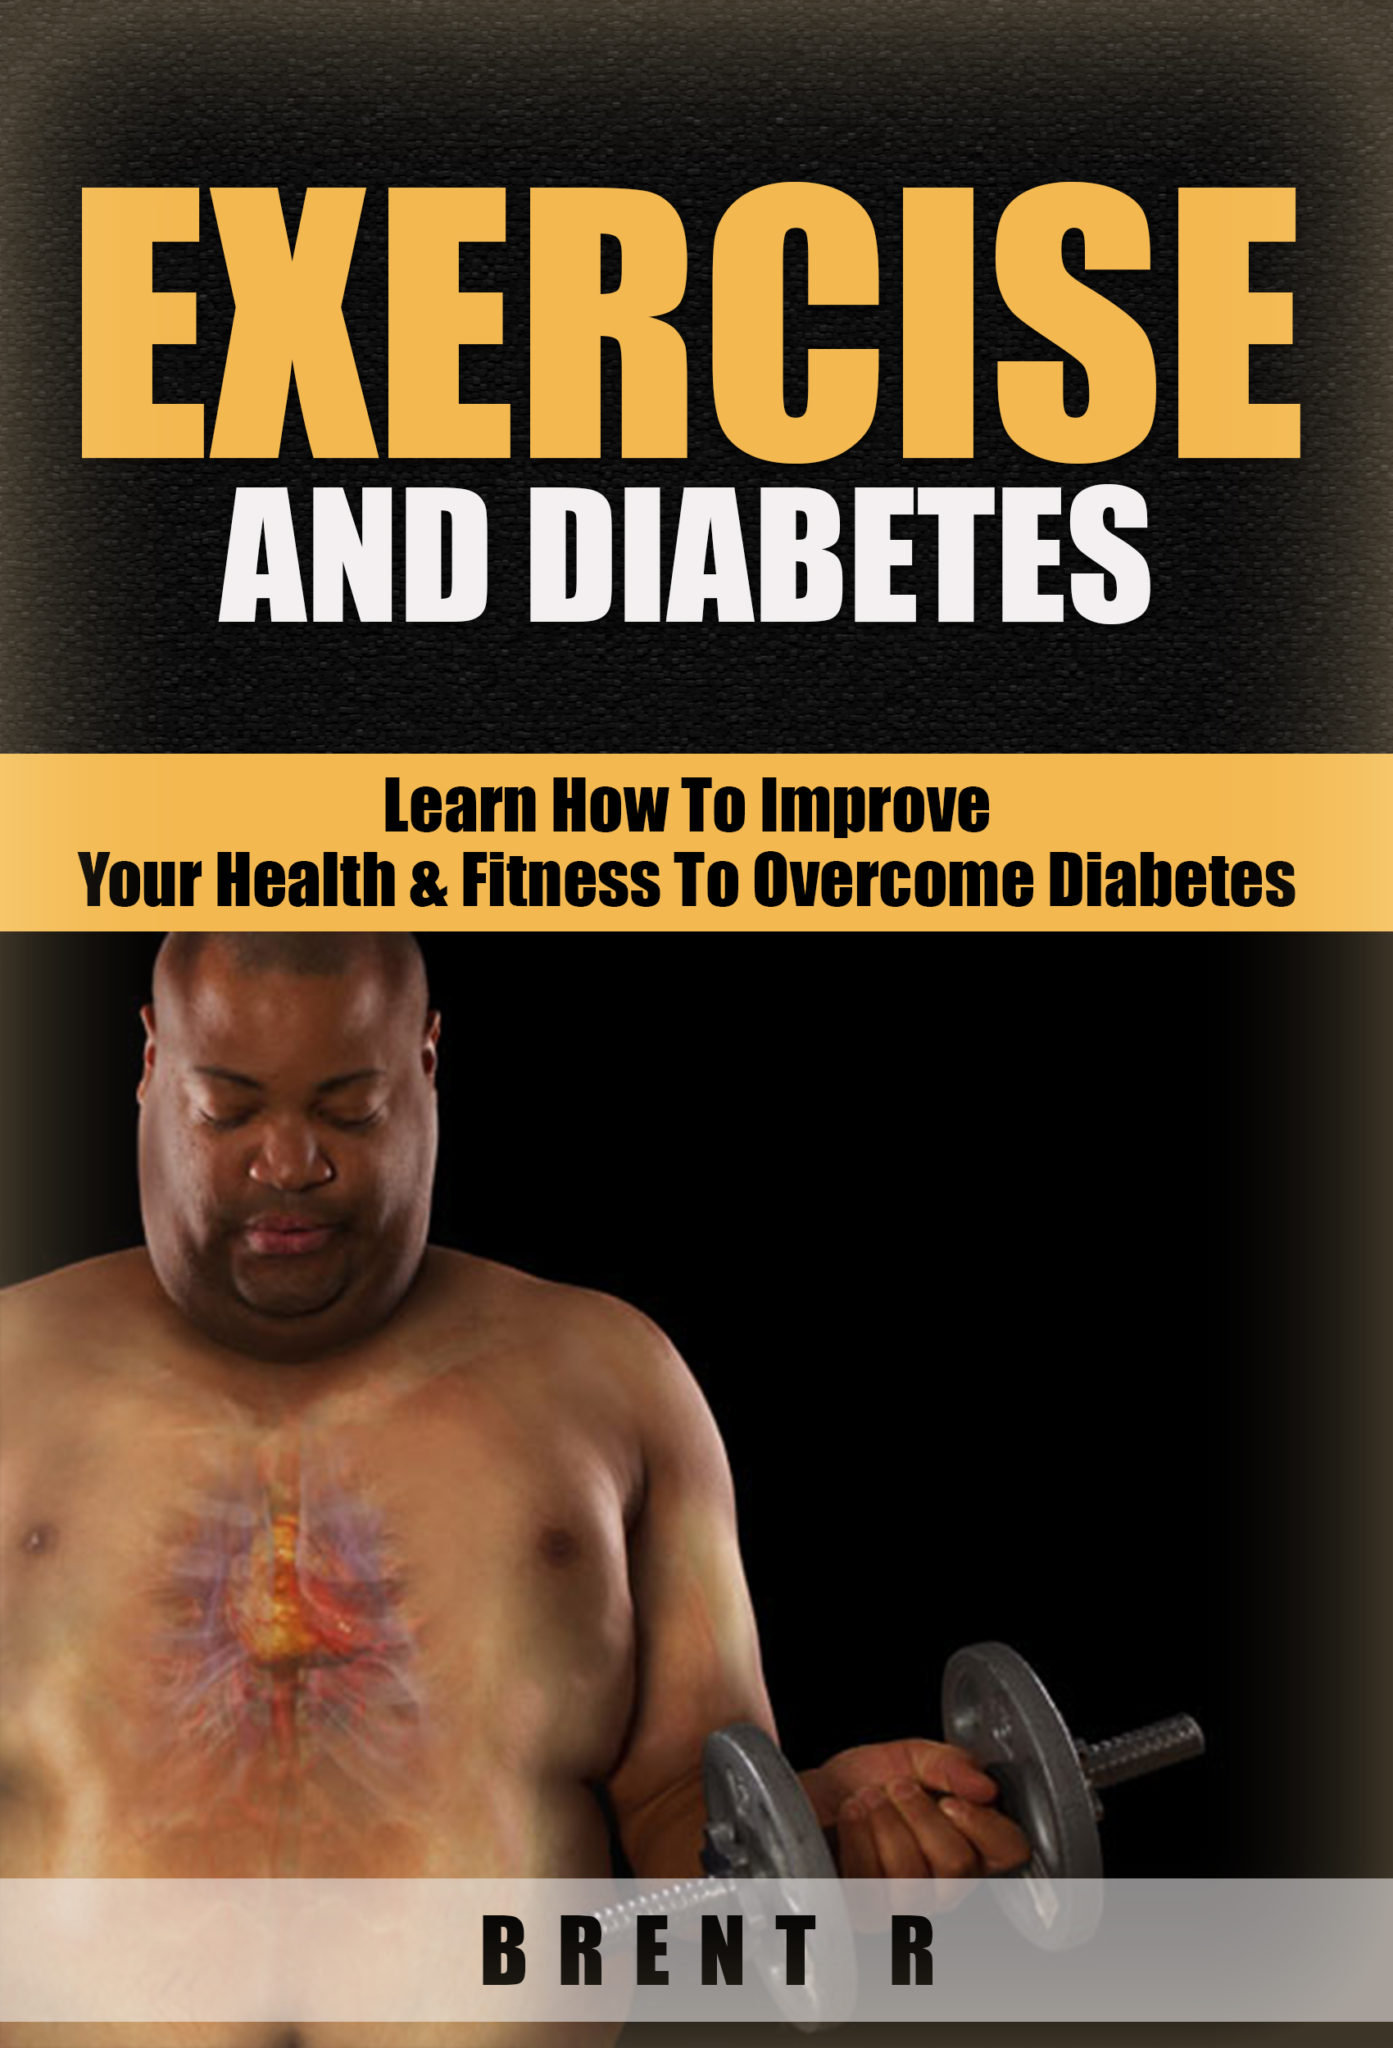 Exercise And Diabetes: Learn How To Improve Your Health & Fitness to Overcome Diabetes by Brent R